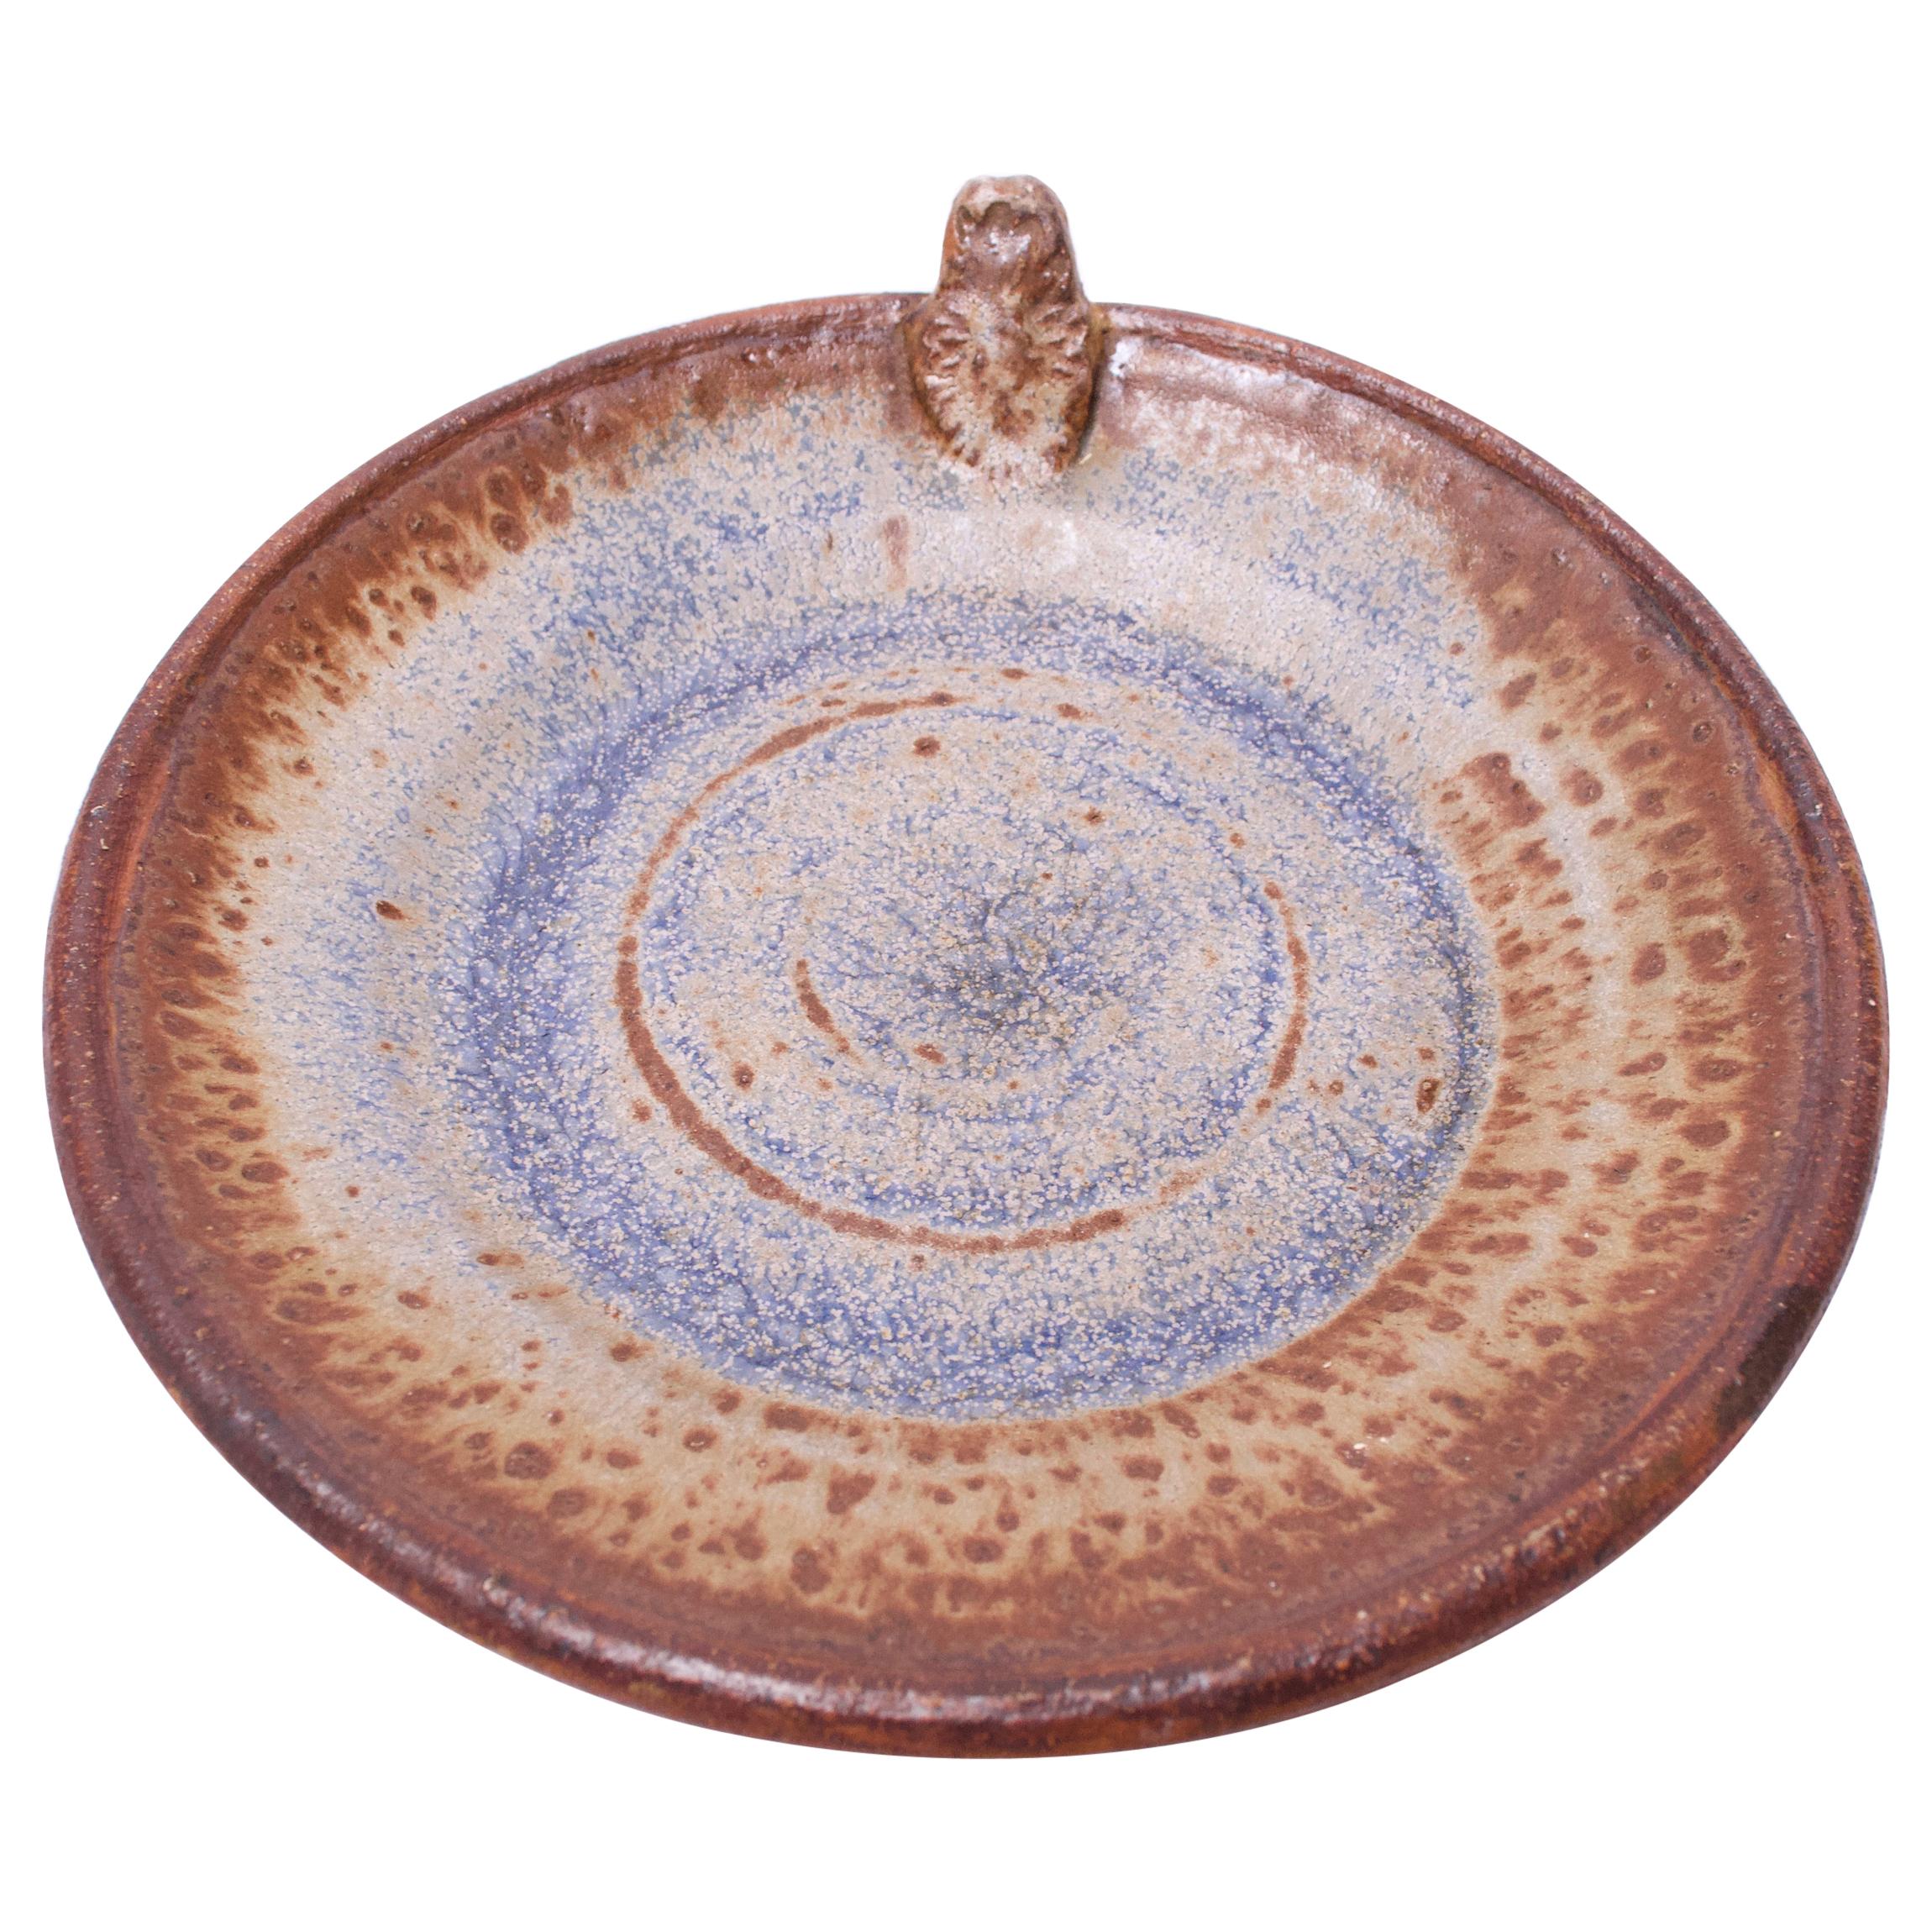 1970s Concentric Circle Stoneware Charger in Blue and Brown